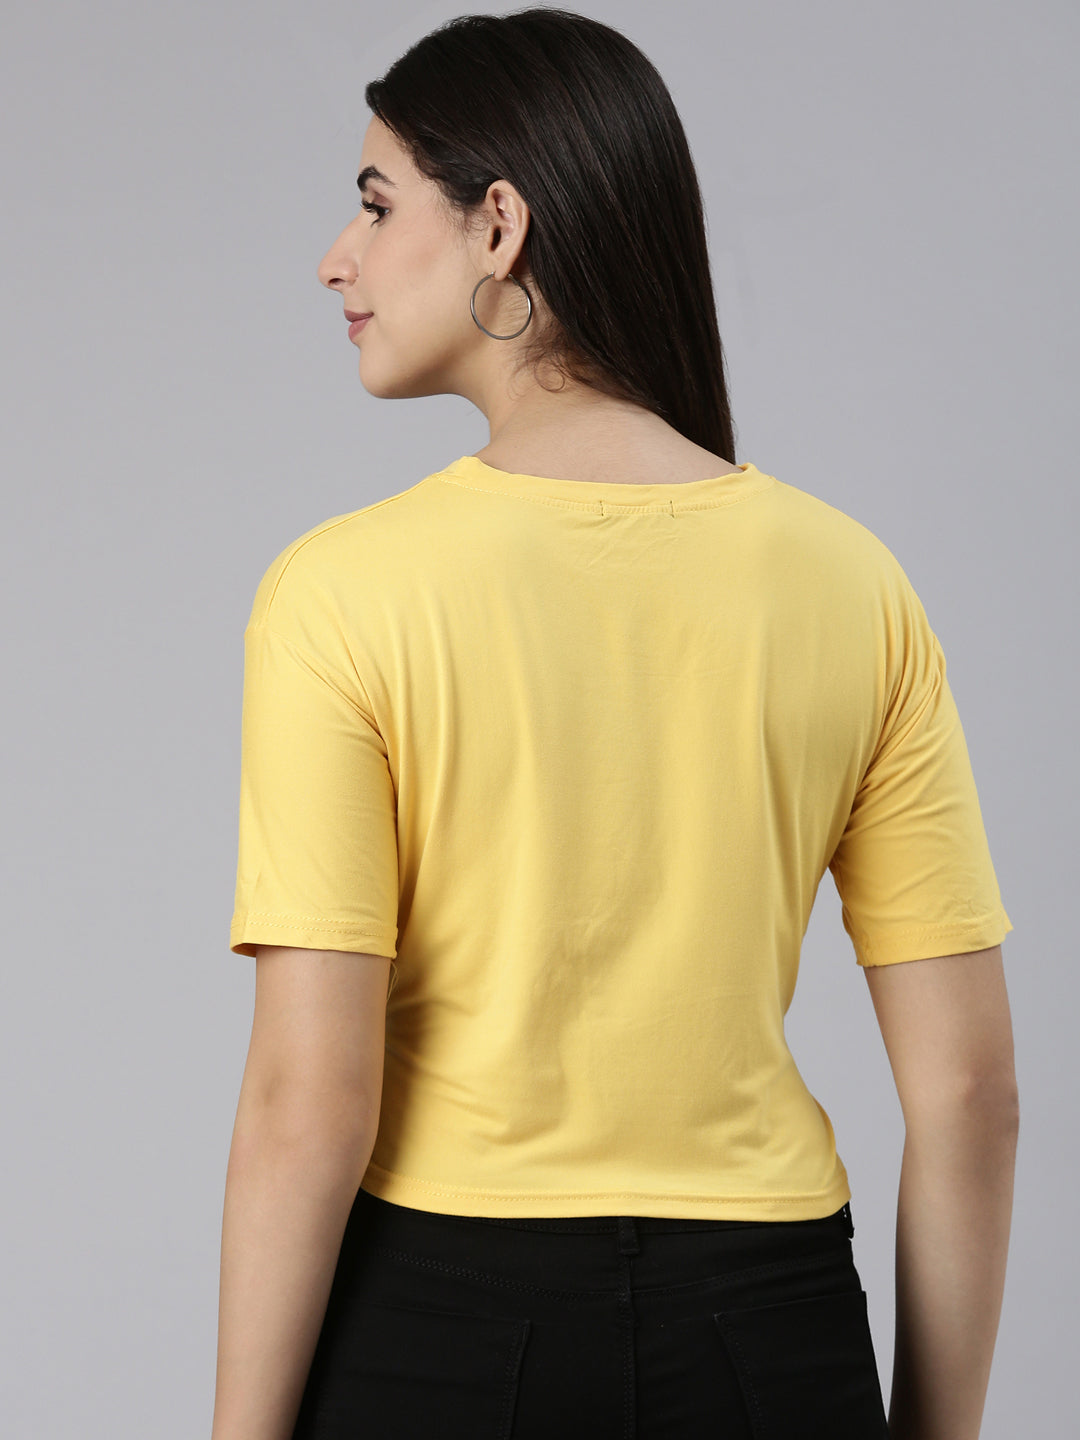 Round Neck Printed Yellow Cinched Waist Crop Top